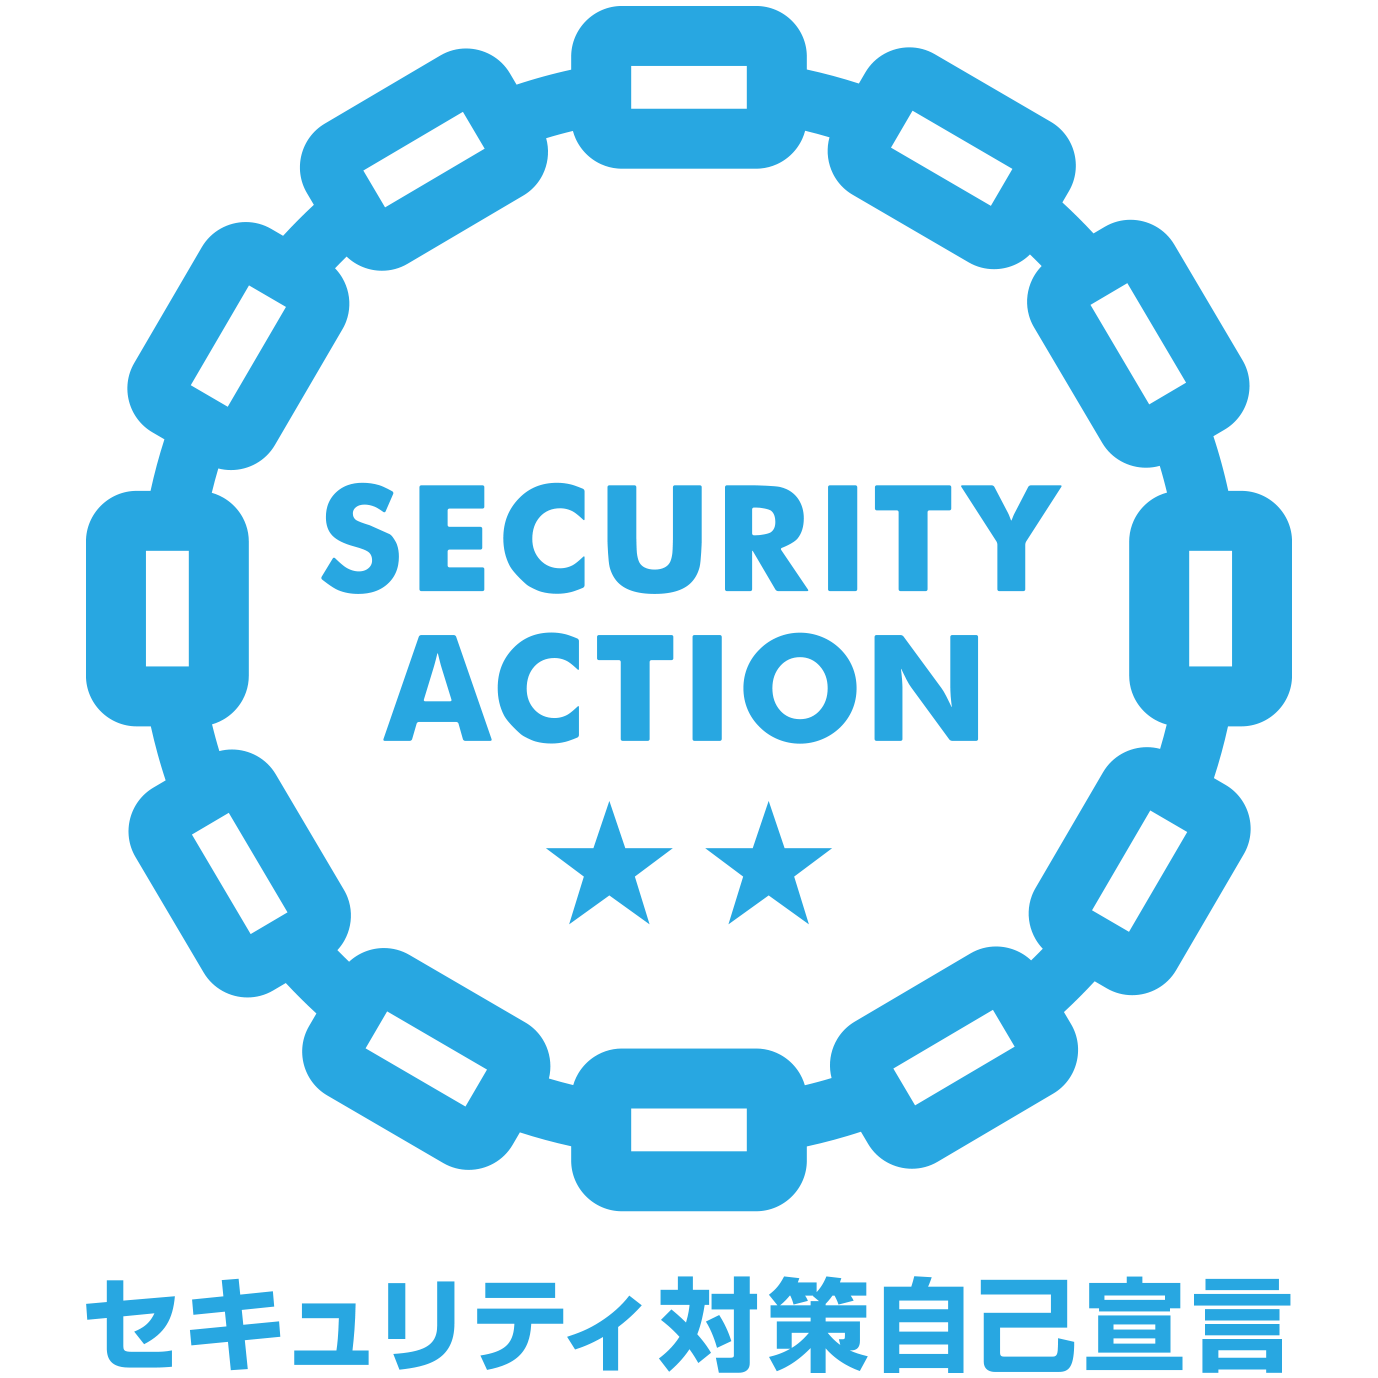 SECURITY ACTION宣言（二つ星）